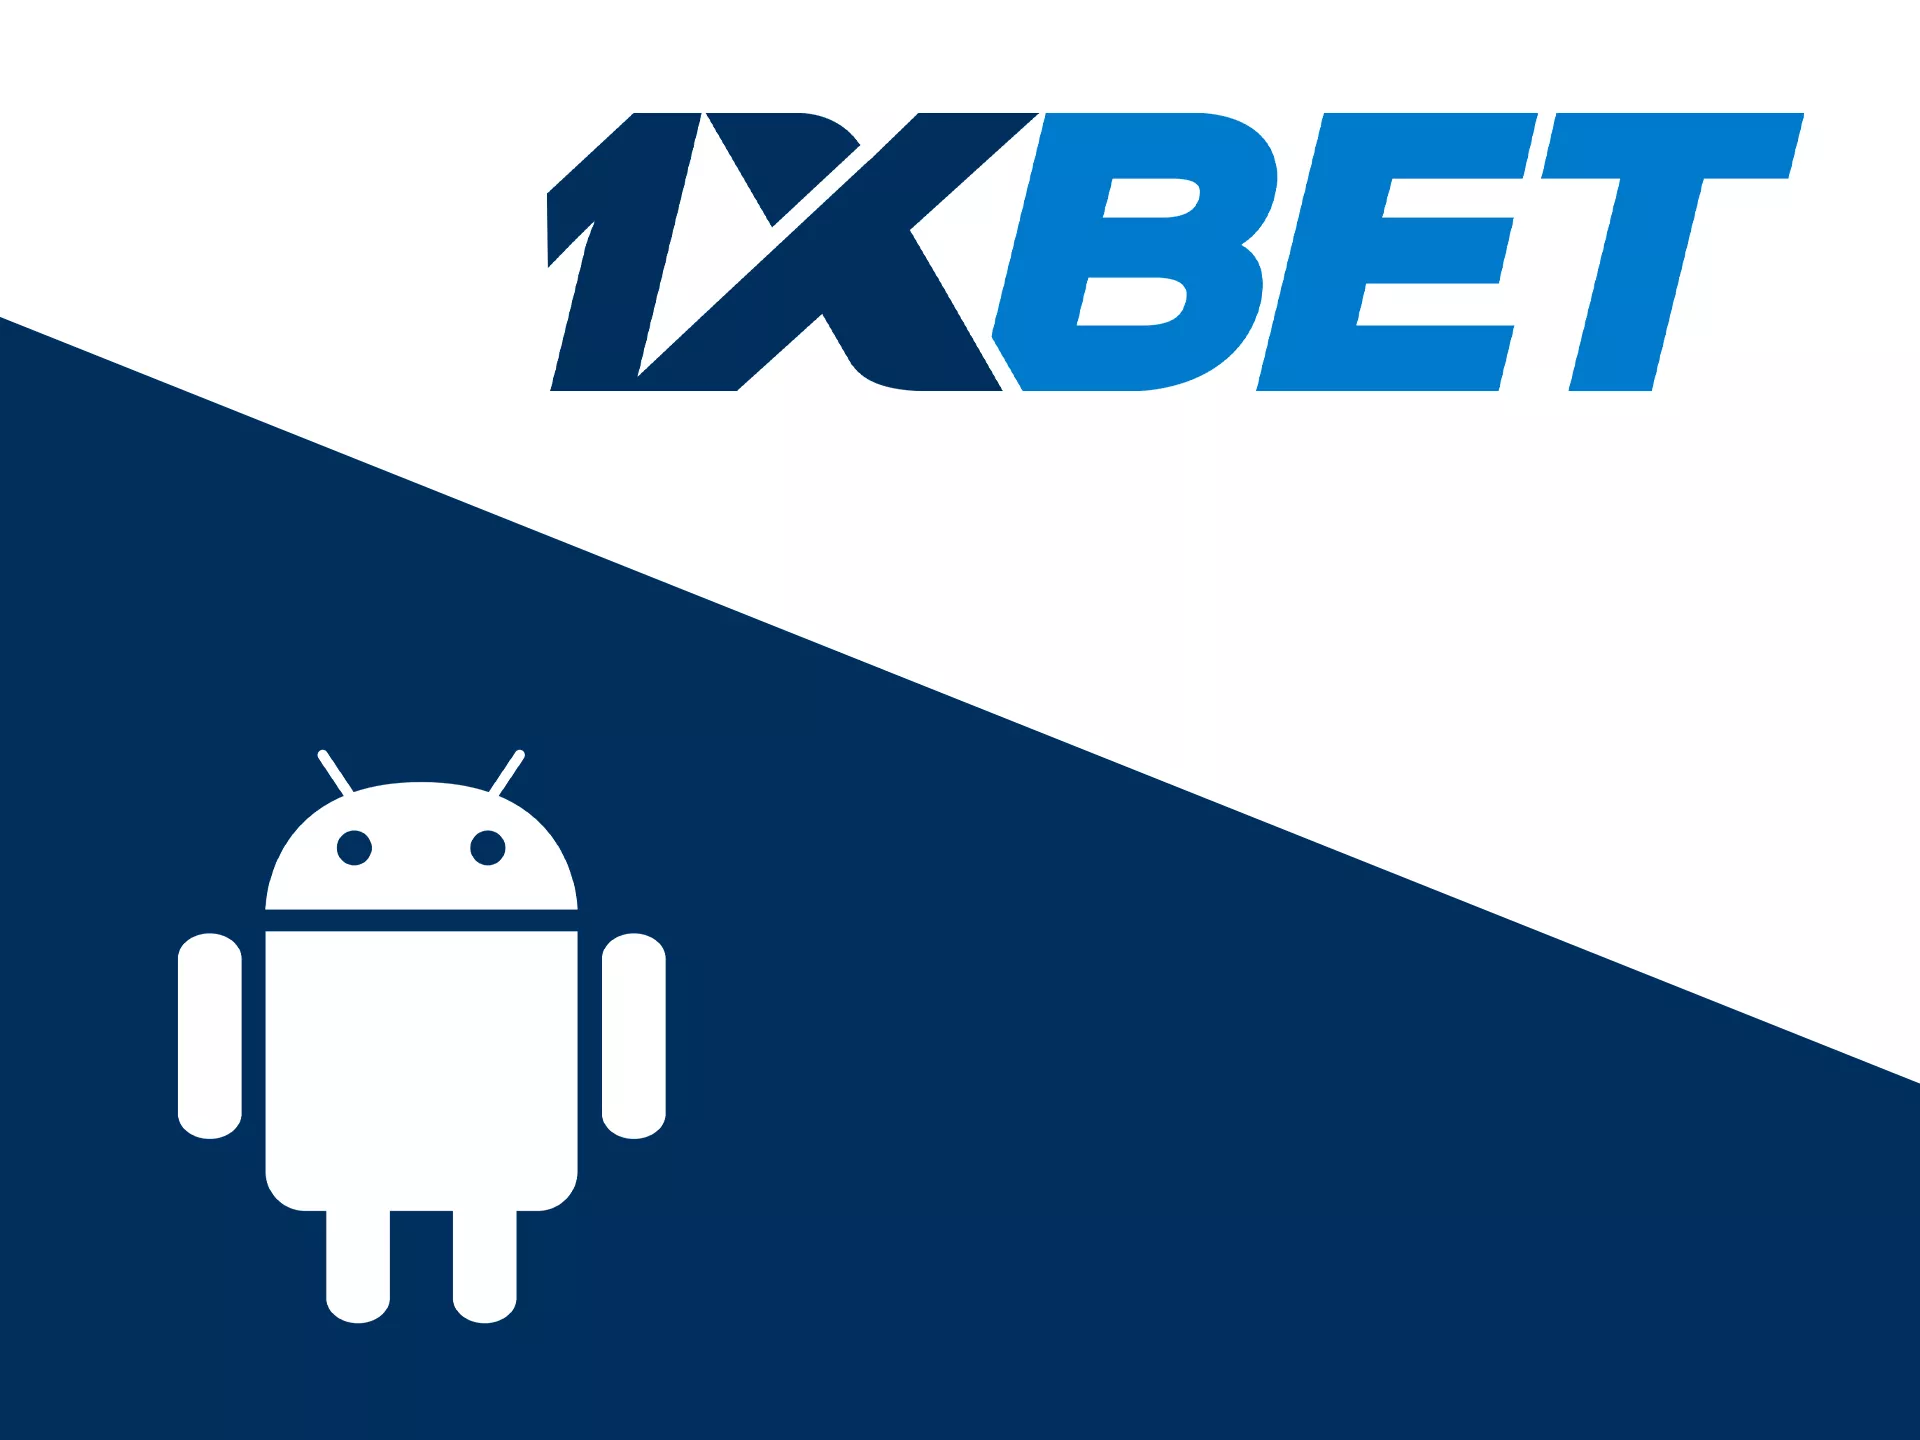 1xbet has a great Android app for betting.